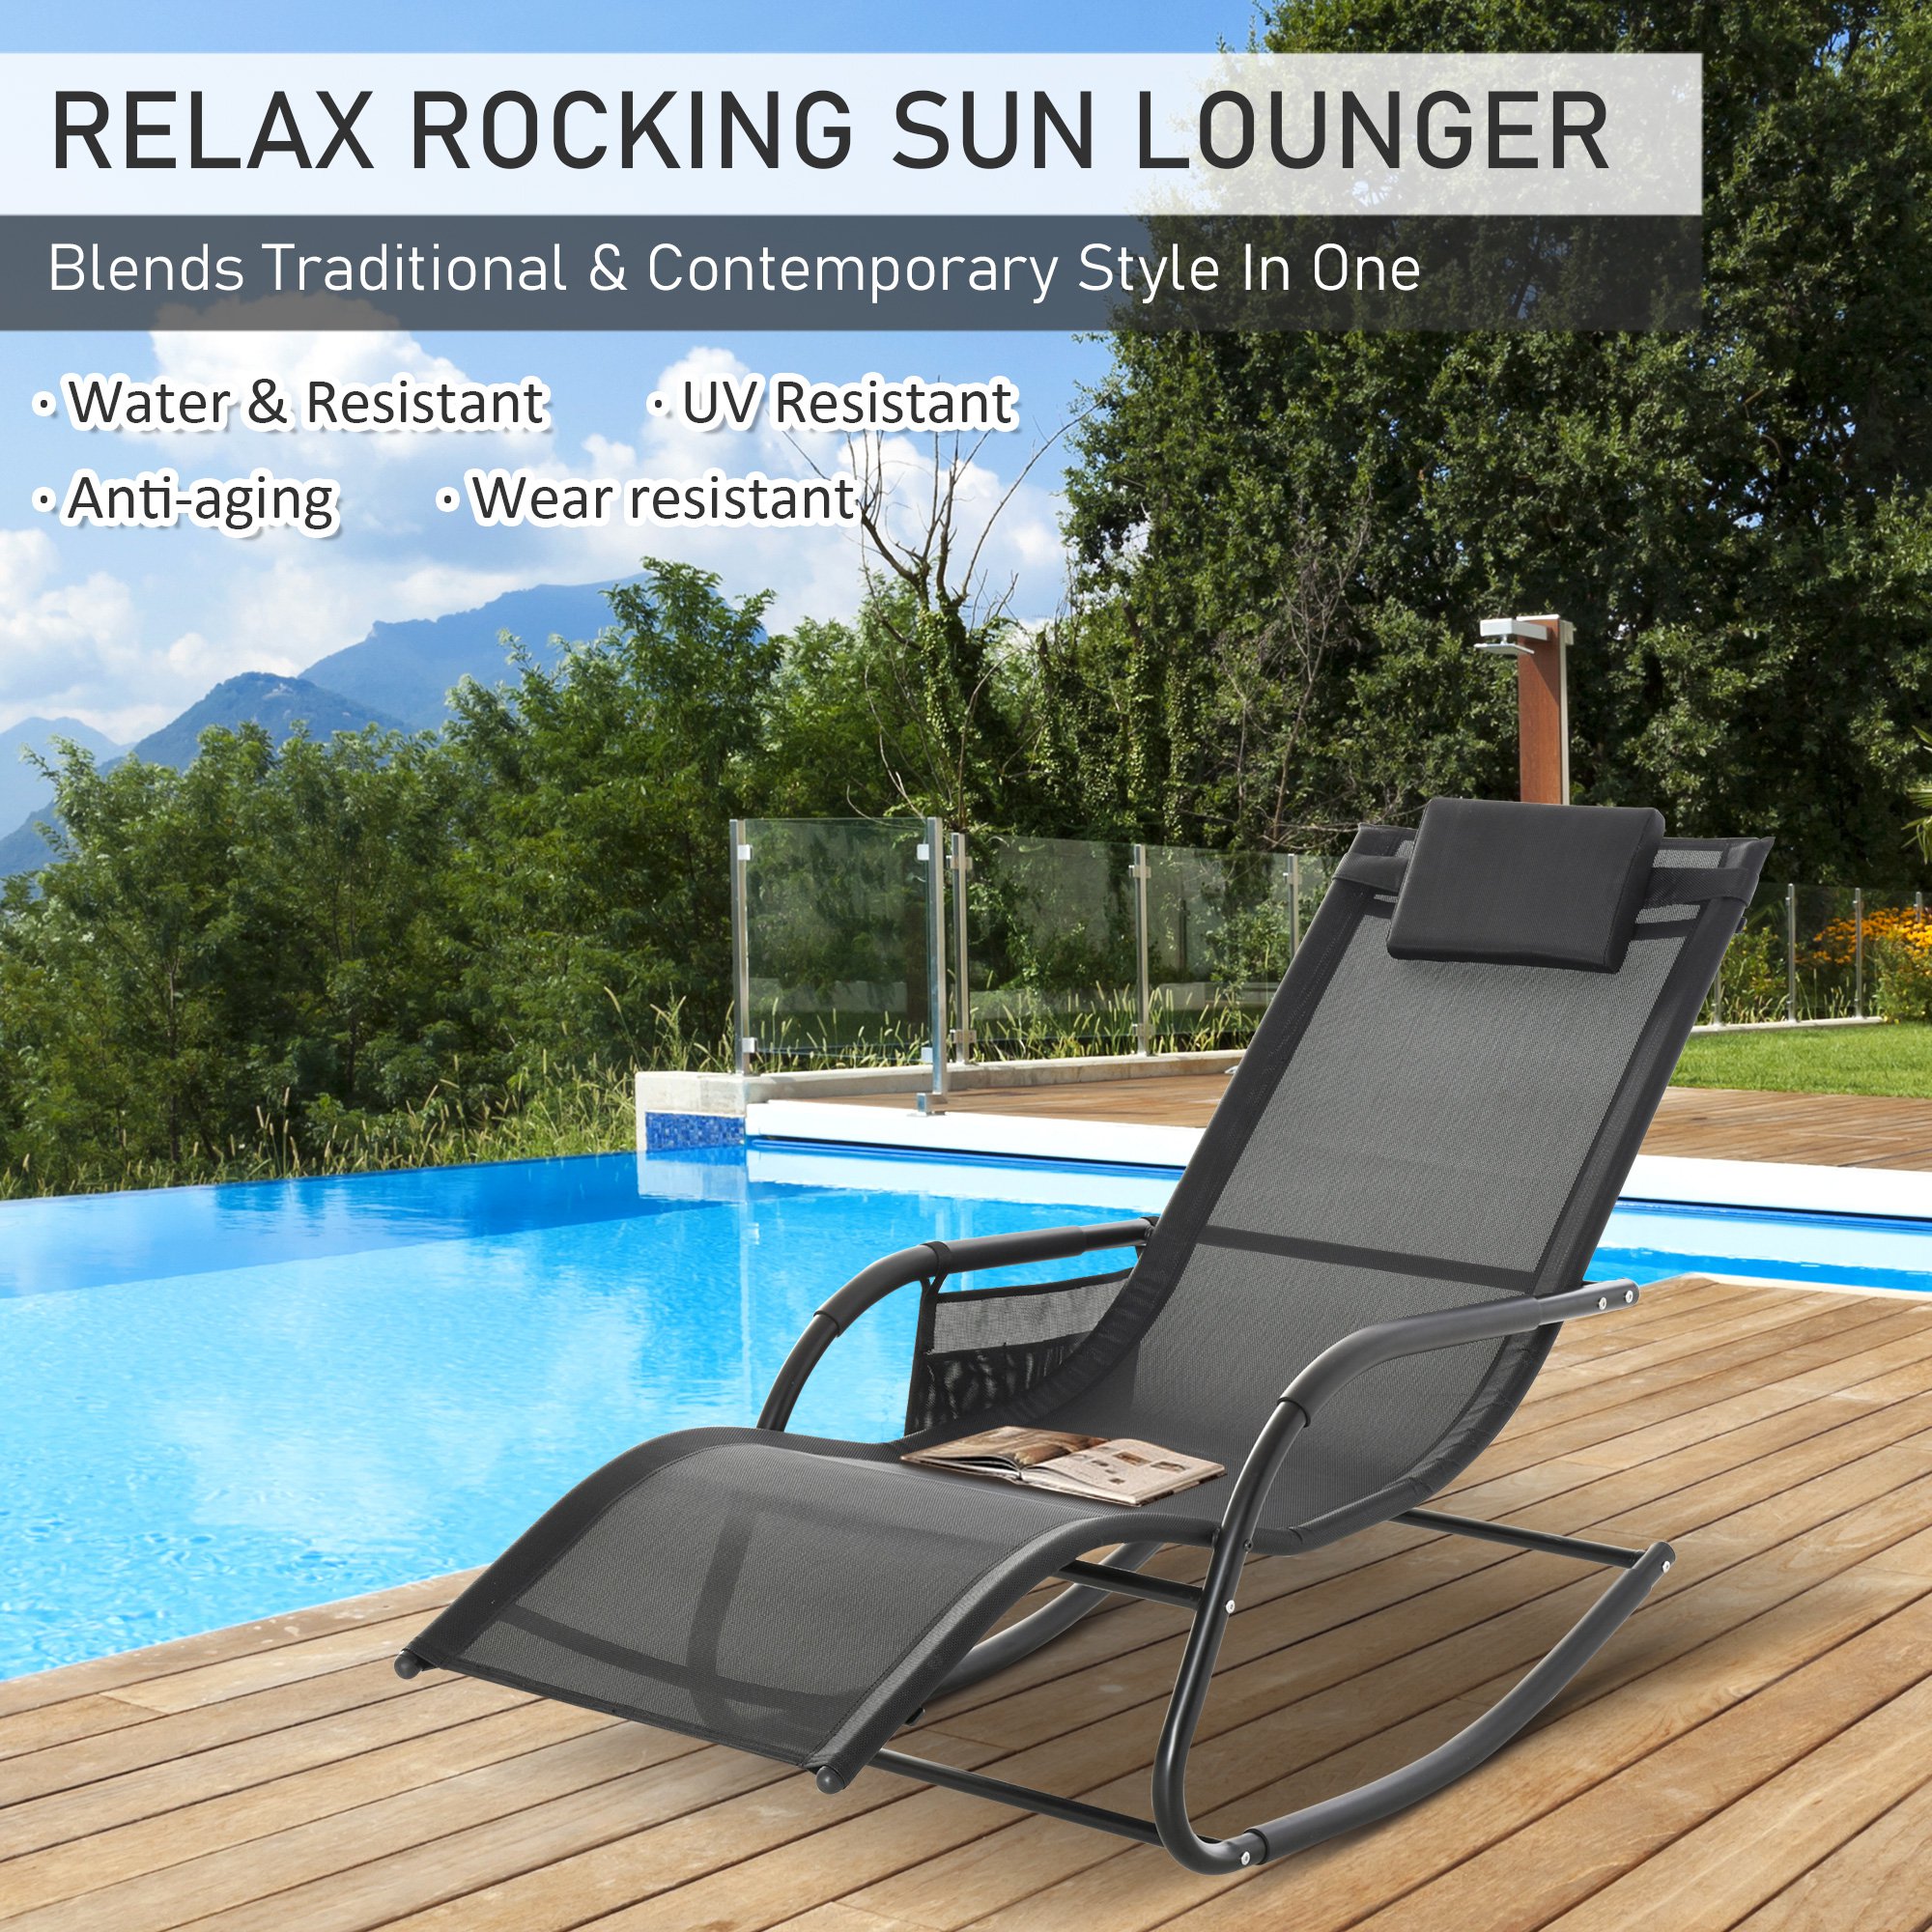 Outsunny Outdoor Rocking Recliner, Sling Sun Lounger with Removable Headrest, Black